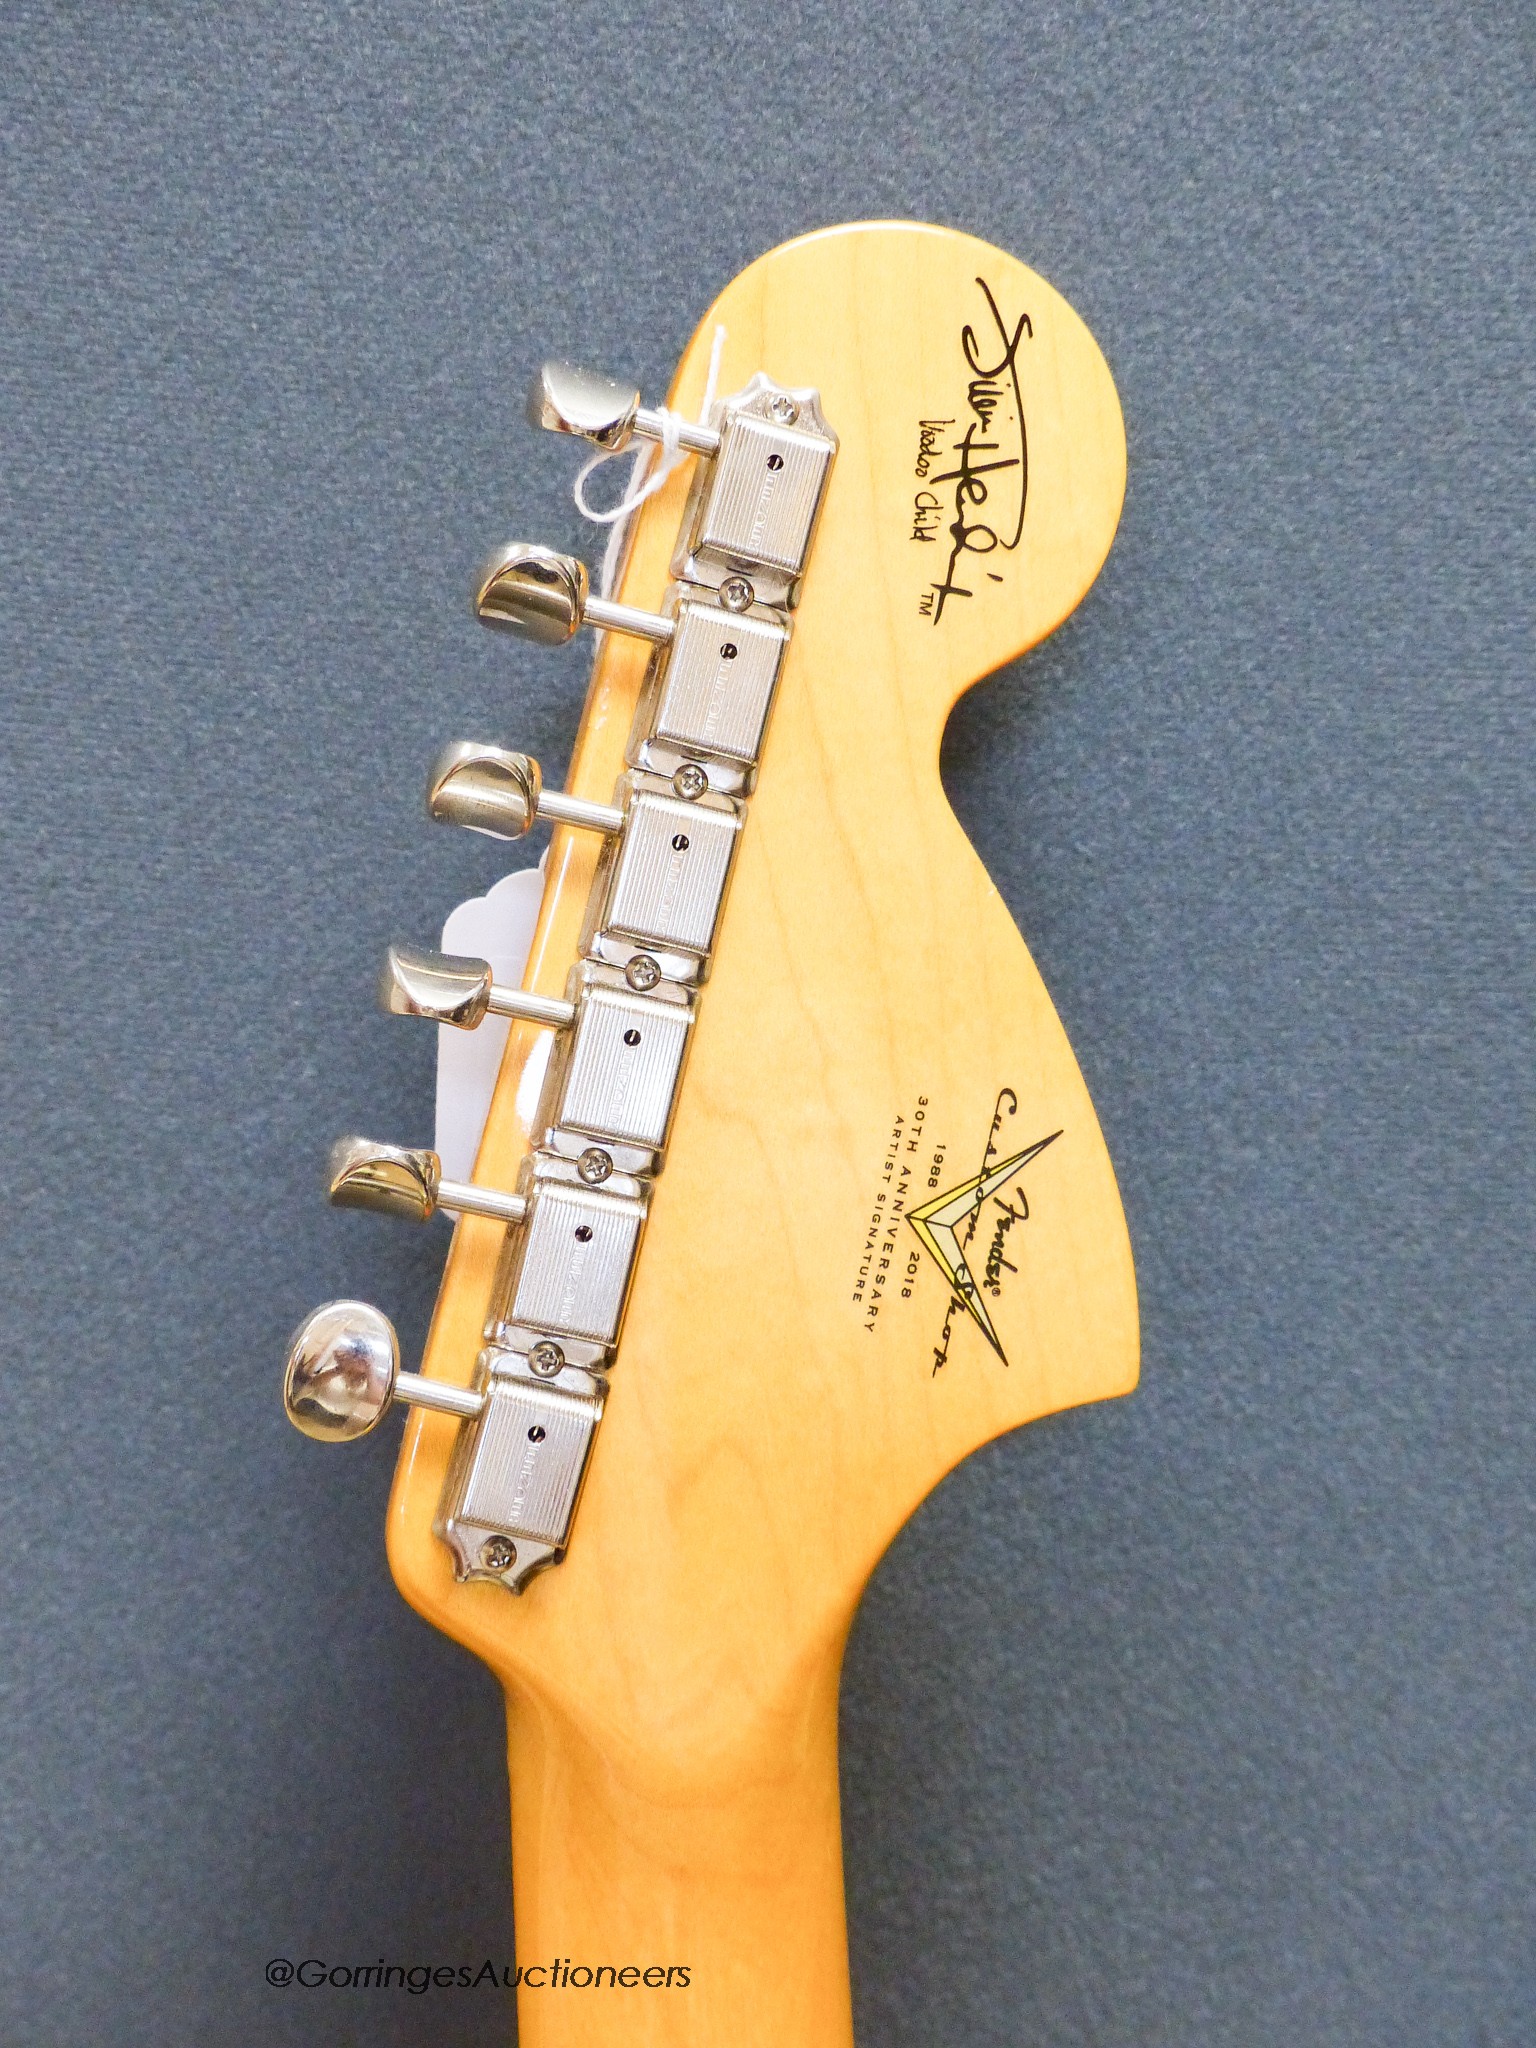 A Fender Stratocaster Jimi Hendrix Voodoo Child 30th Anniversary Custom Shop electric guitar, c.2019, Olympic white with G & G custom shop hard case and stand